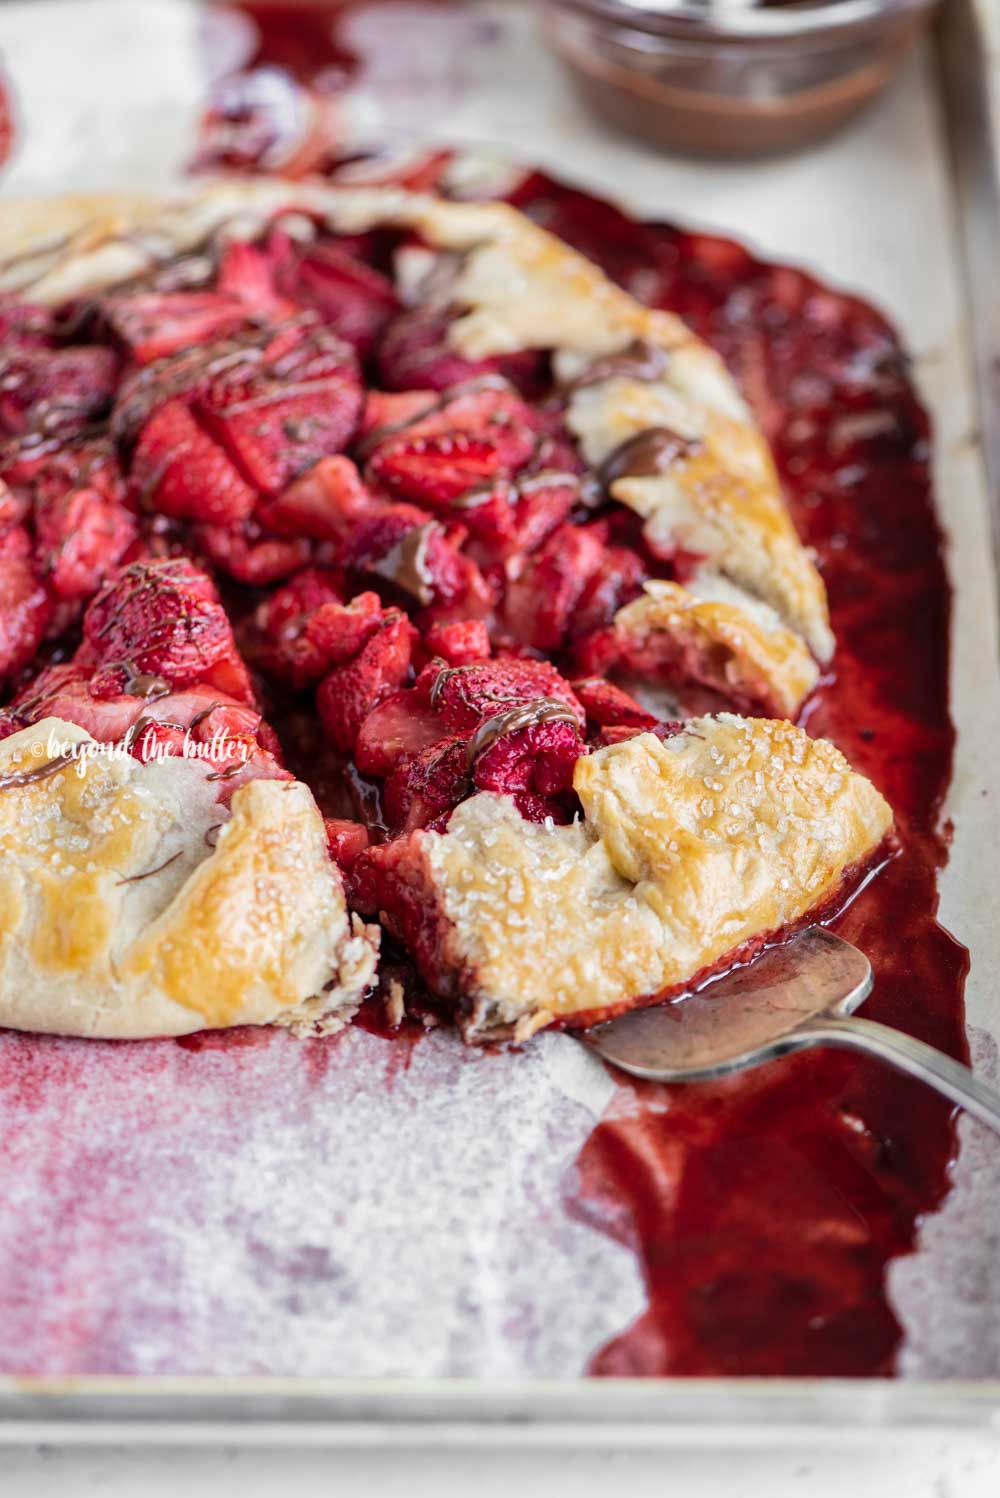 Angled image of a Berry Nutella Galette on a baking sheet with Nutella drizzled over the top and 2 slices cut | All Images © Beyond the Butter™